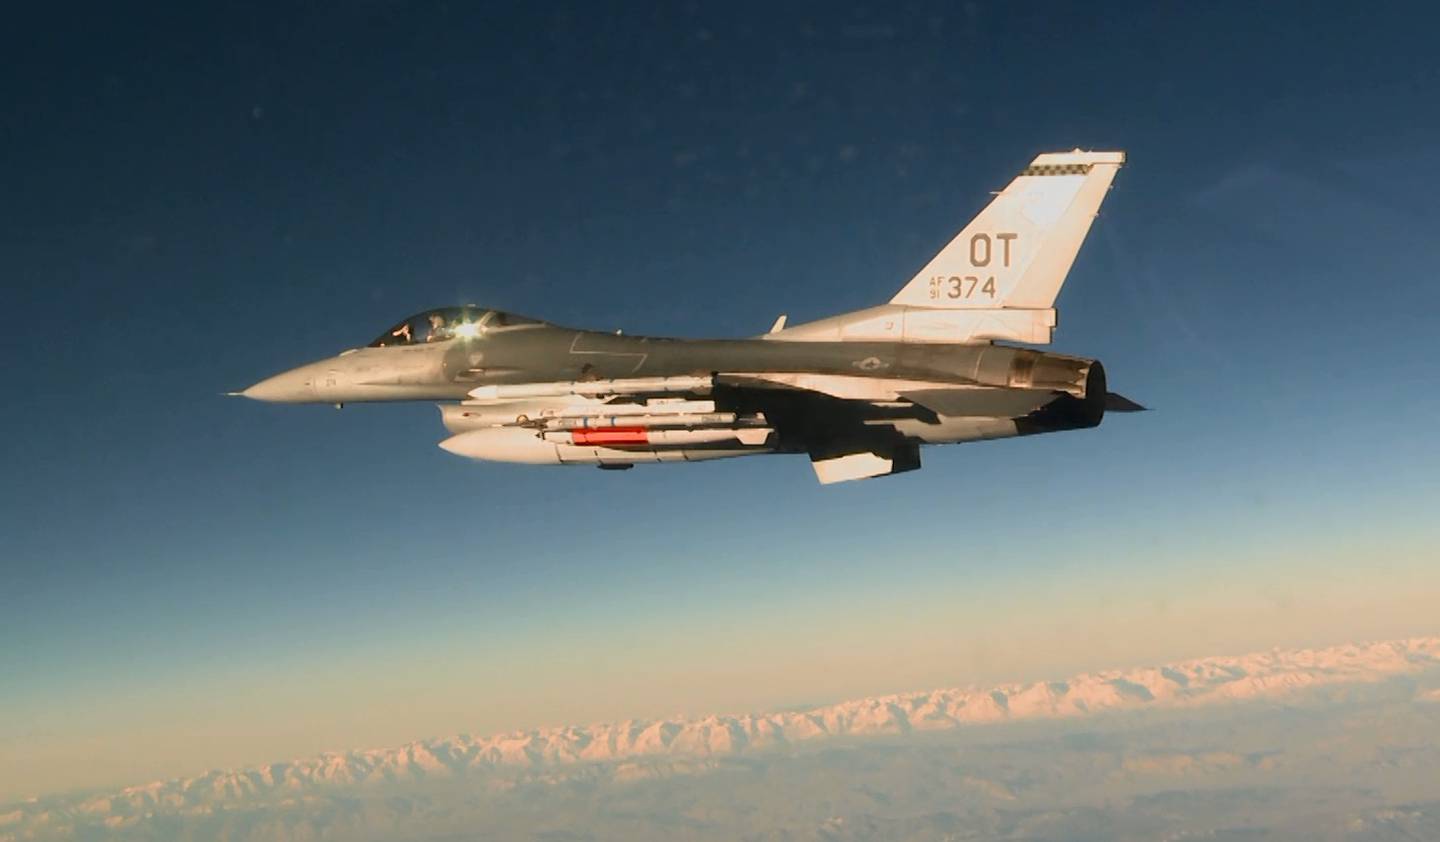 An Air Force F-16C dropped an inert B61-12 during a development flight test by the 422nd Flight Test and Evaluation Squadron at Nellis Air Force Base, Nevada, on March 14, 2017. The test is part of a life-extension program for the bomb to improve its safety, security and reliability. (Staff Sgt. Brandi Hansen/Air Force)